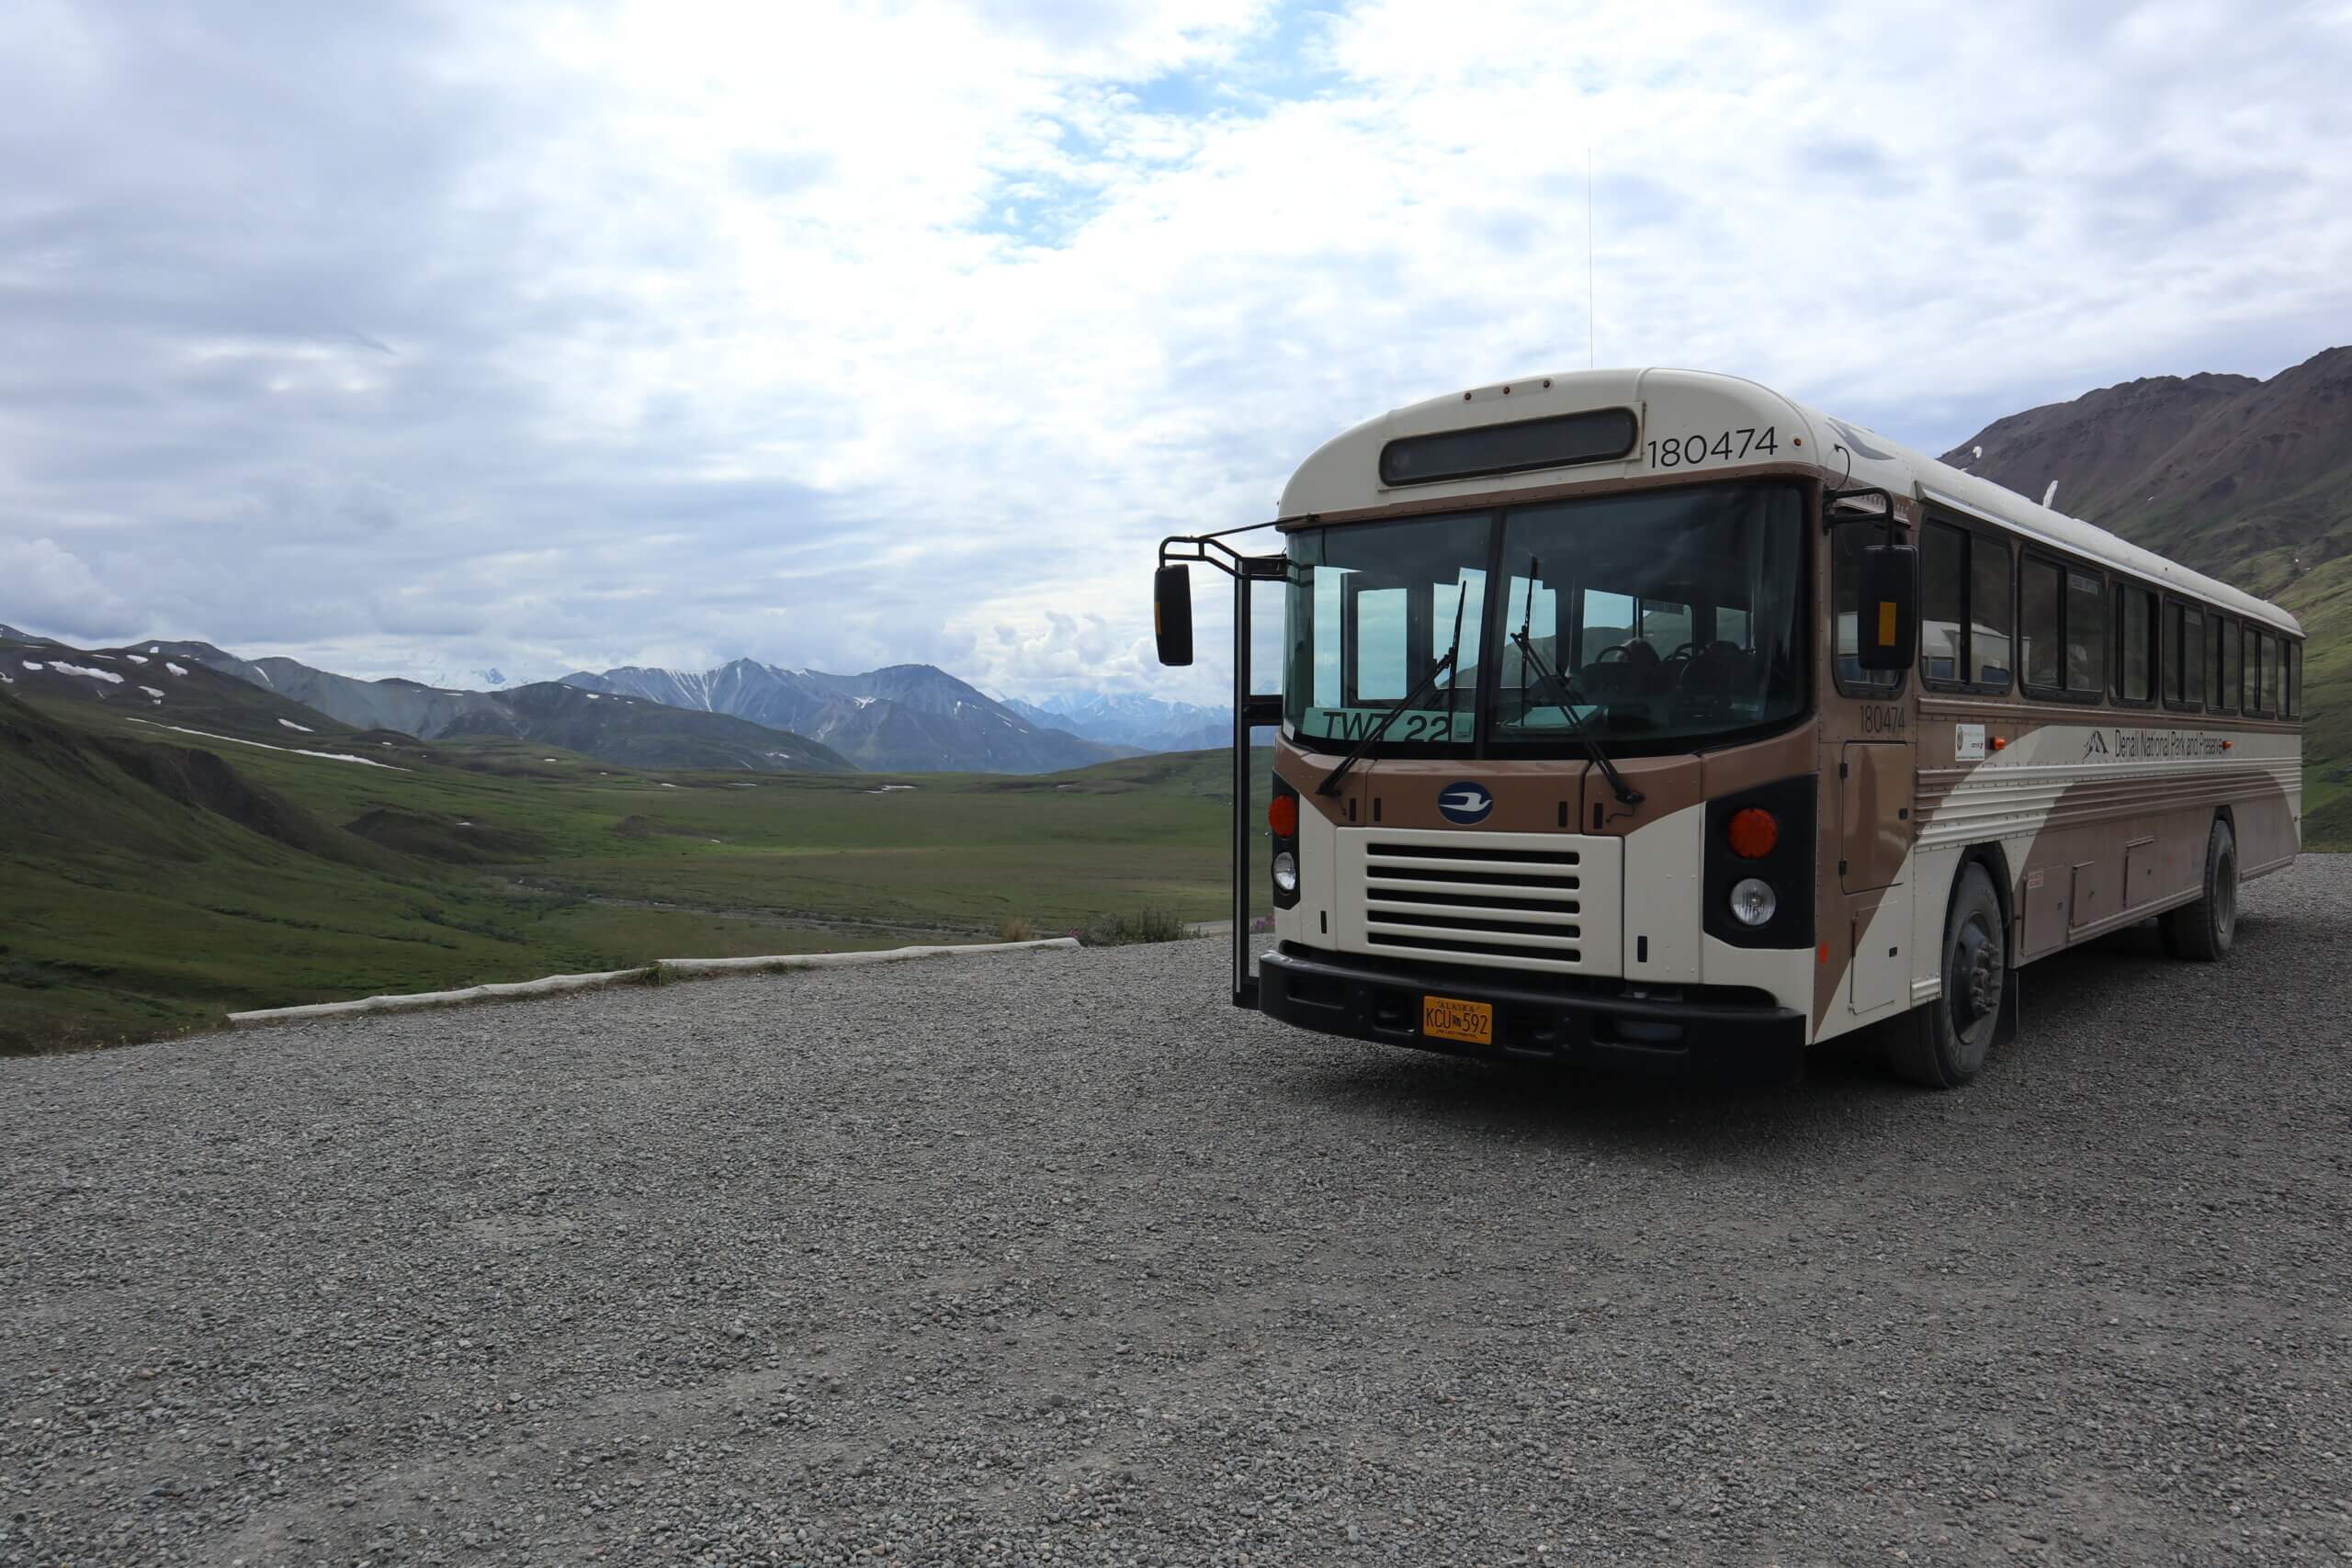 A First Timer’s Guide to Denali National Park